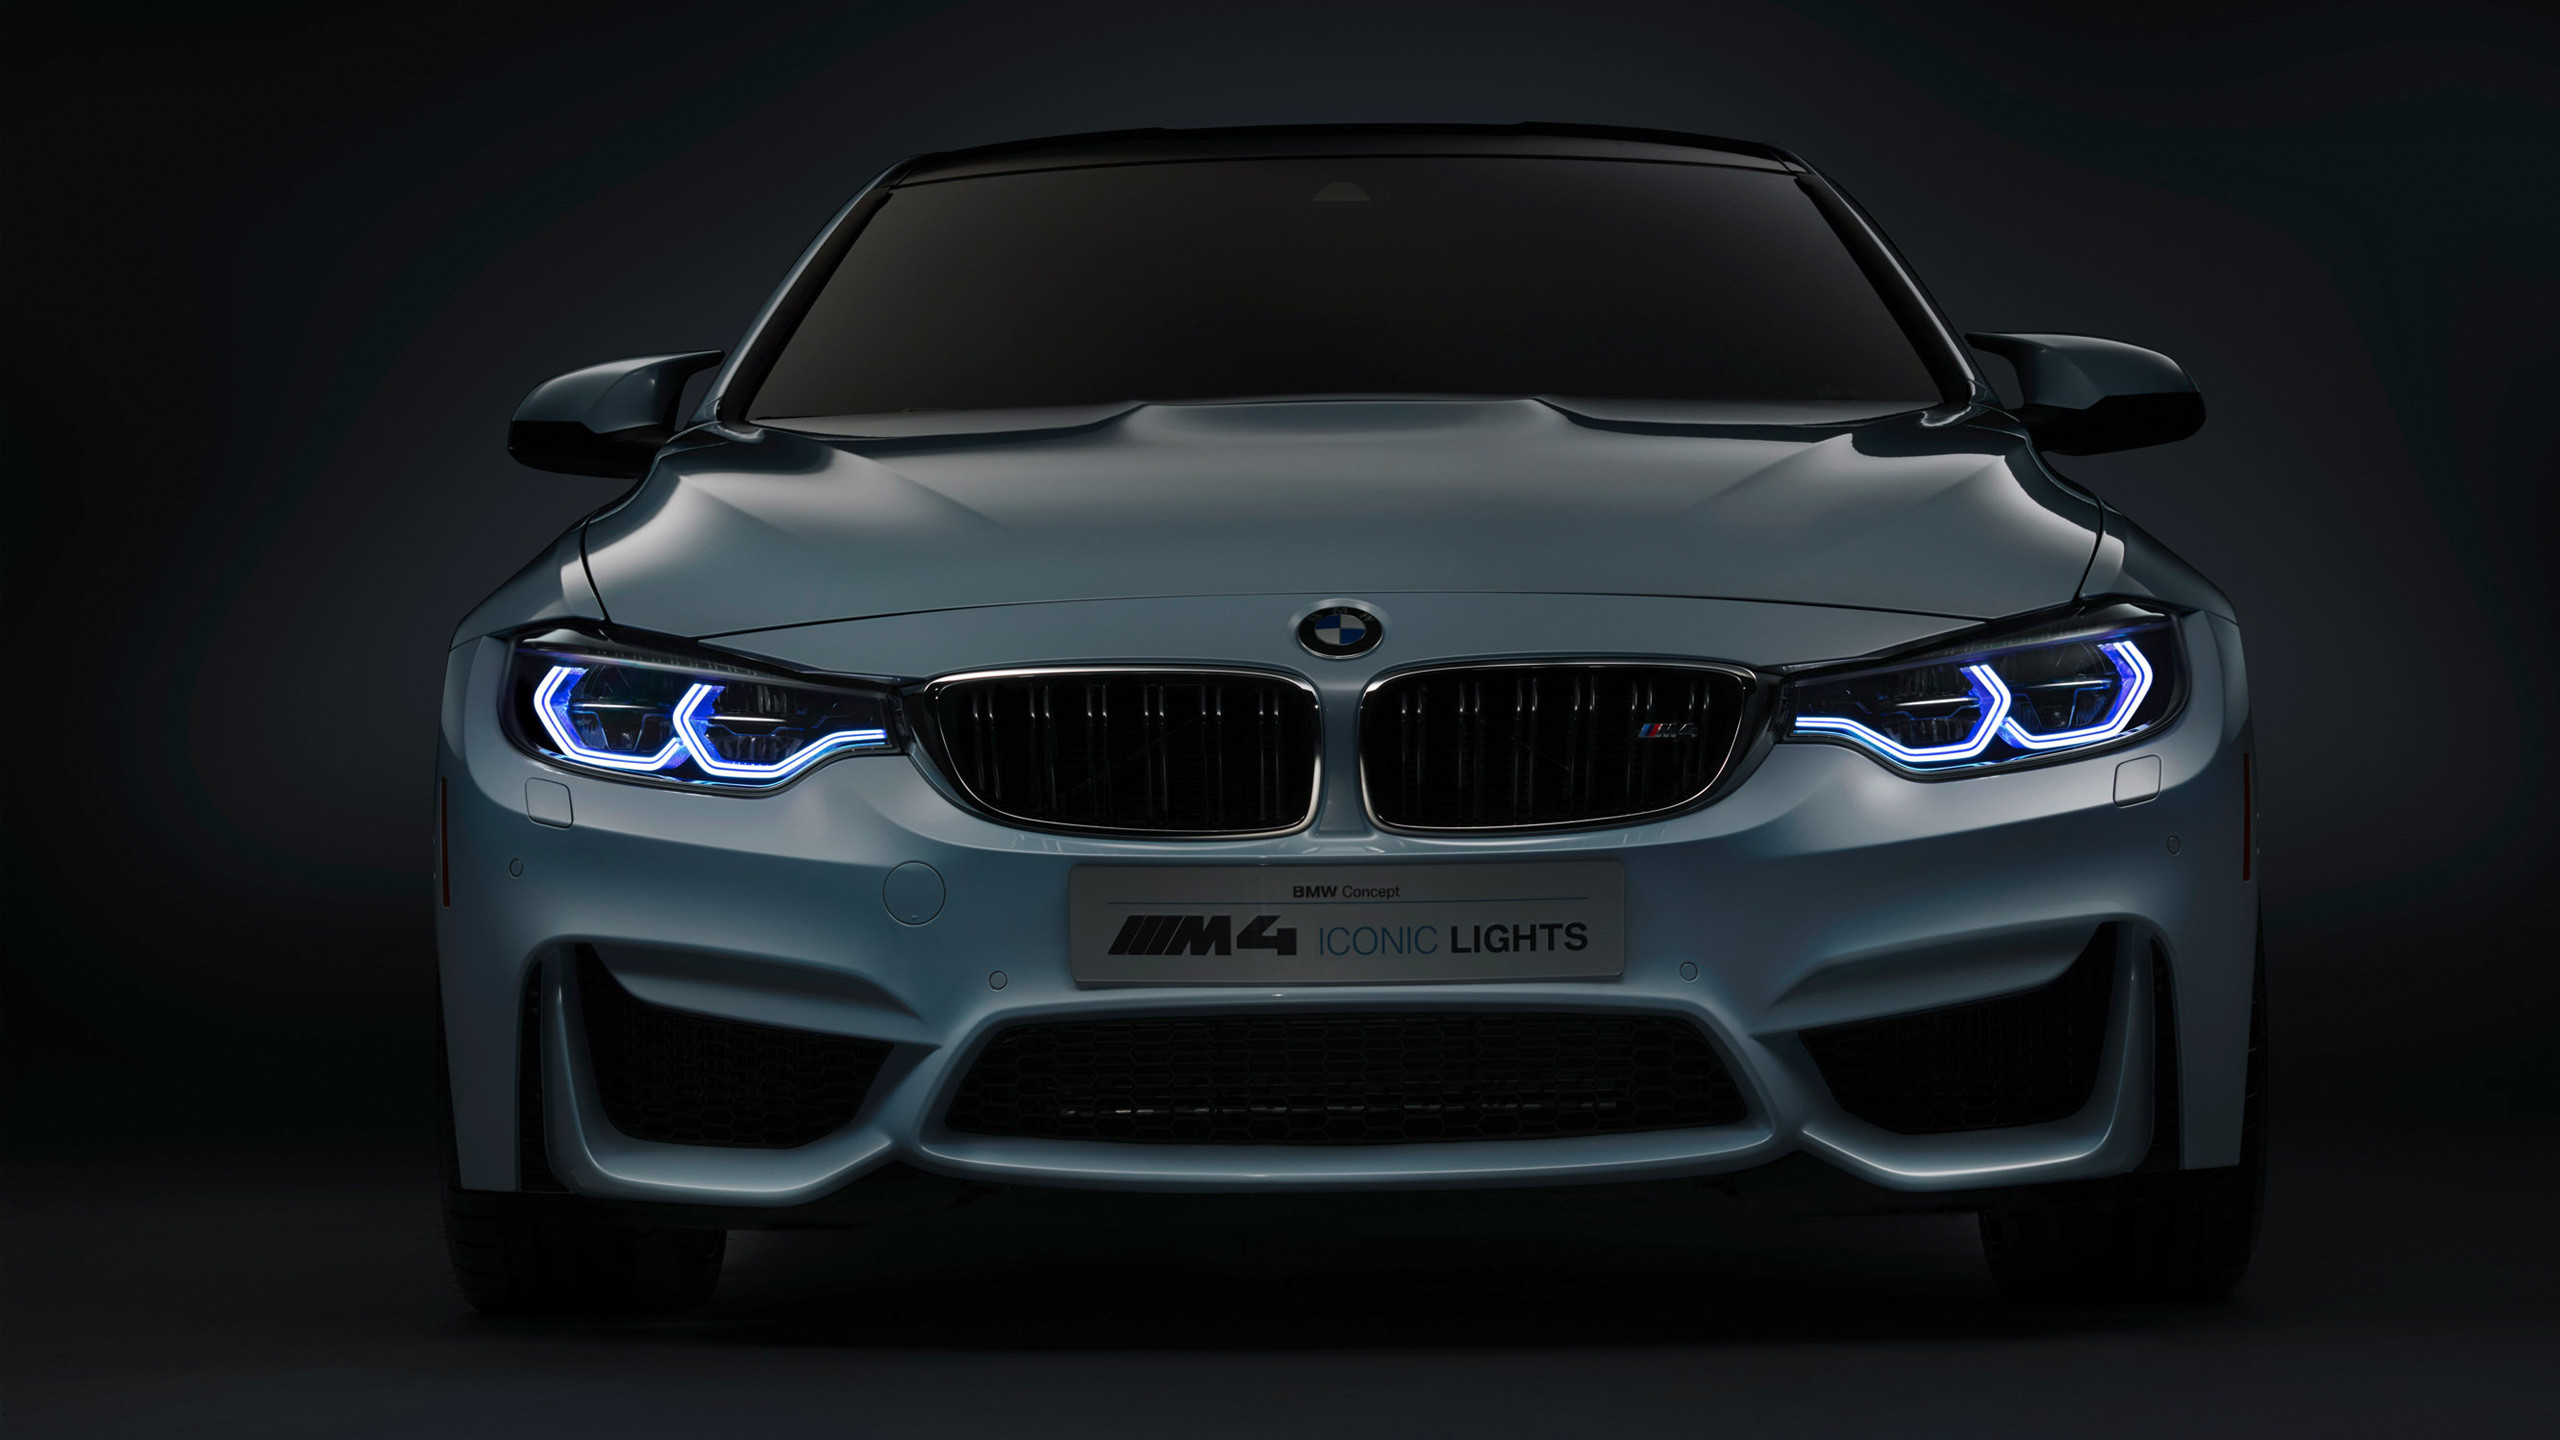 2560x1440 ... WallpaperSafari bmw hd wallpapers download Collection (76 ) ...